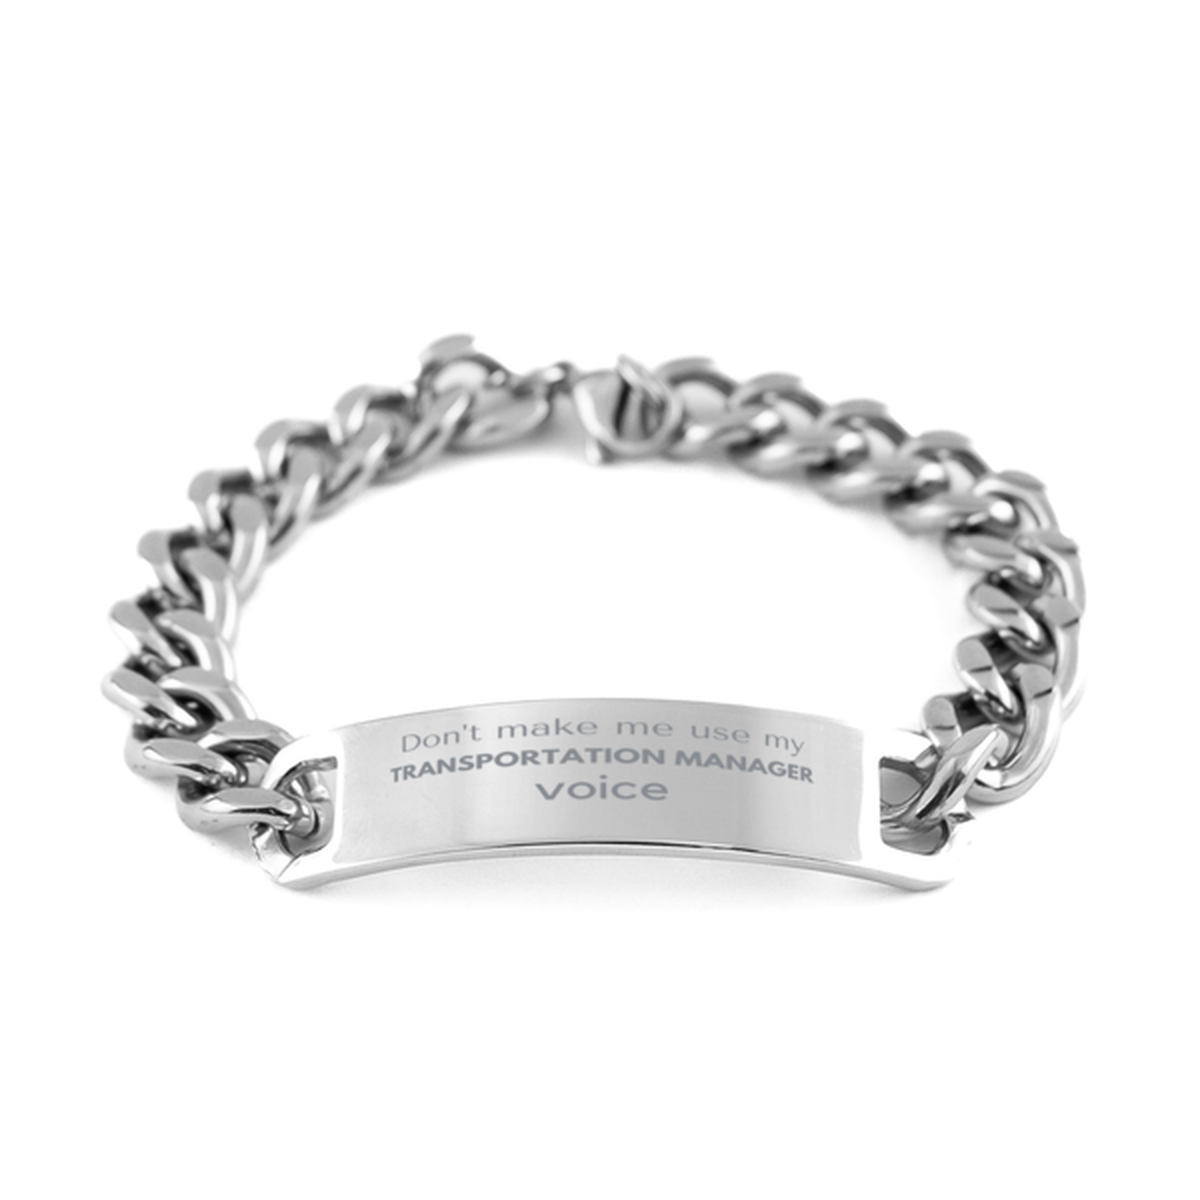 Don't make me use my Transportation Manager voice, Sarcasm Transportation Manager Gifts, Christmas Transportation Manager Cuban Chain Stainless Steel Bracelet Birthday Unique Gifts For Transportation Manager Coworkers, Men, Women, Colleague, Friends